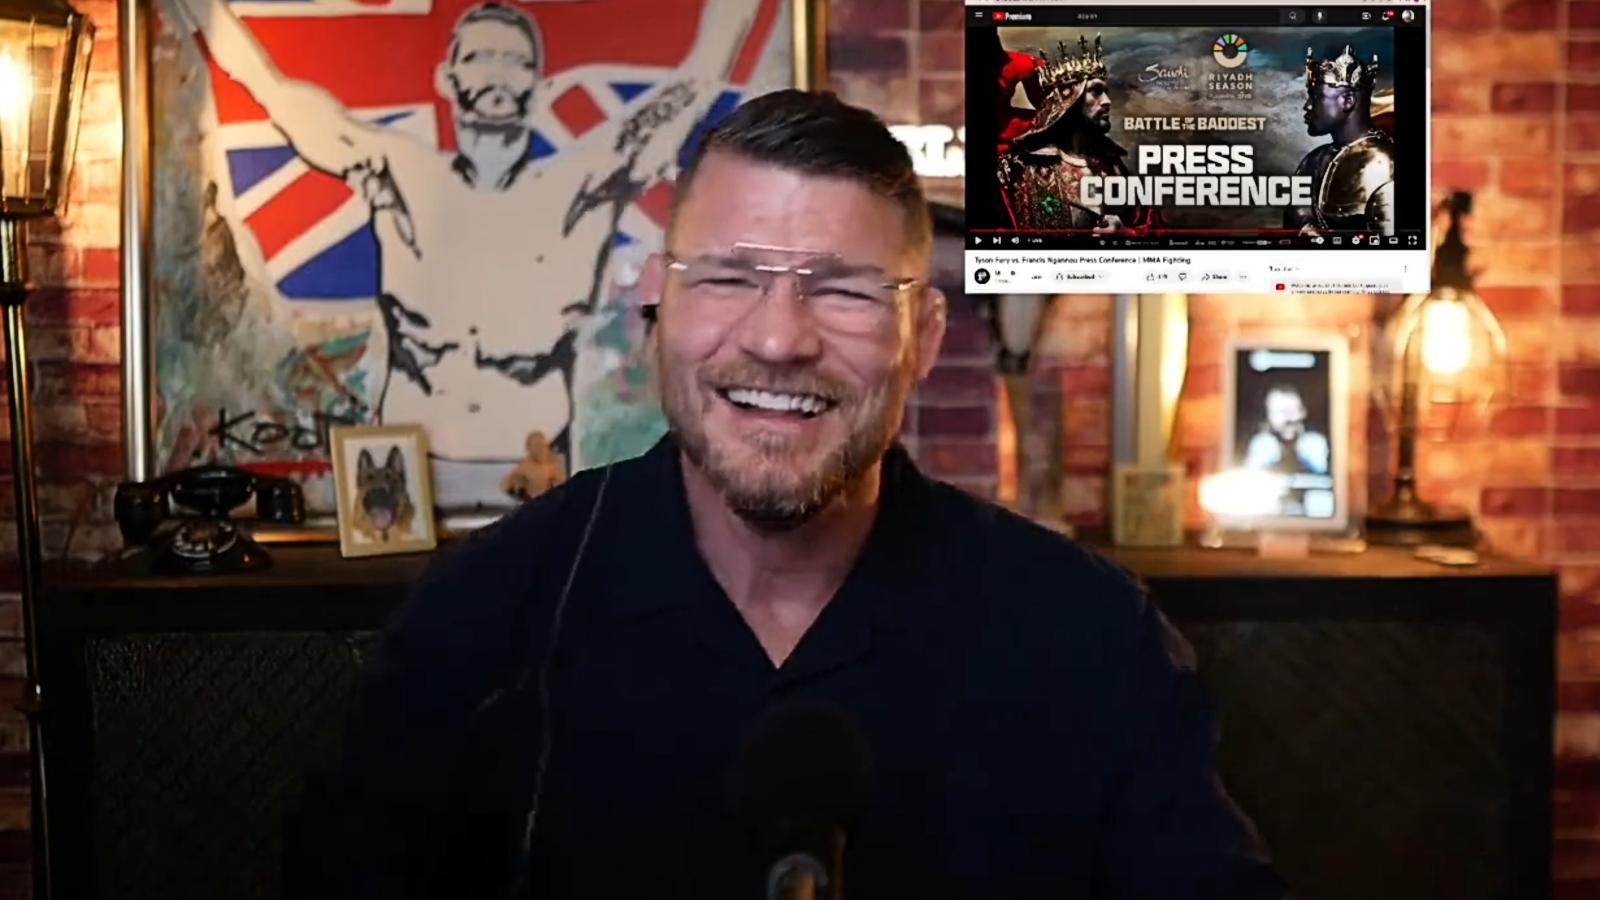 Michael Bisping gets trolled